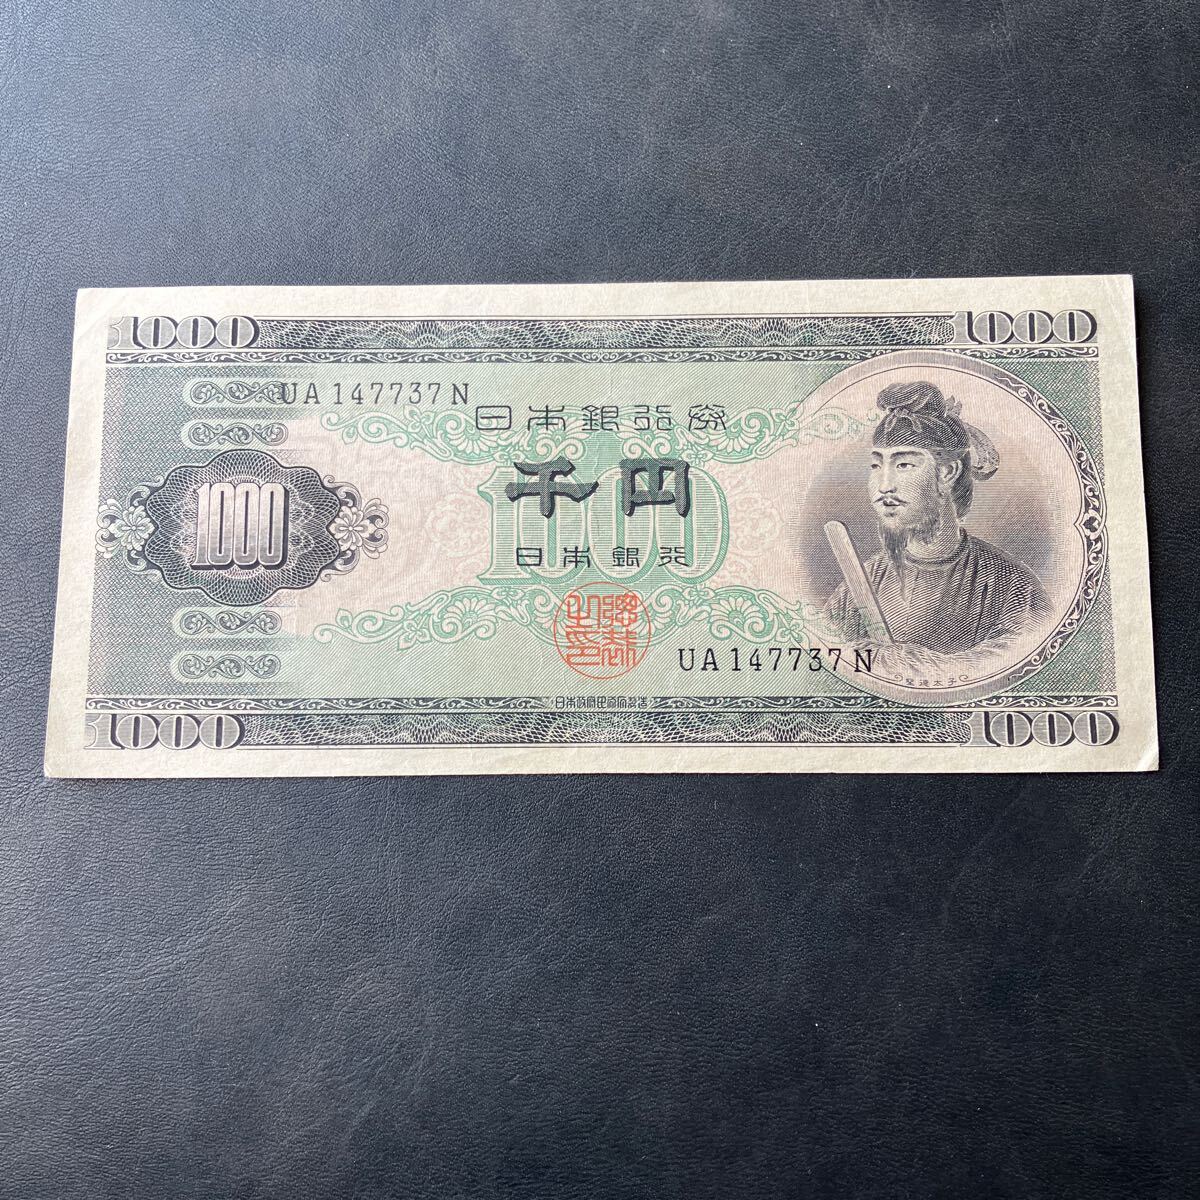  thousand jpy .. virtue futoshi . Japan Bank B number ticket old note 1,000 jpy . beautiful goods *26